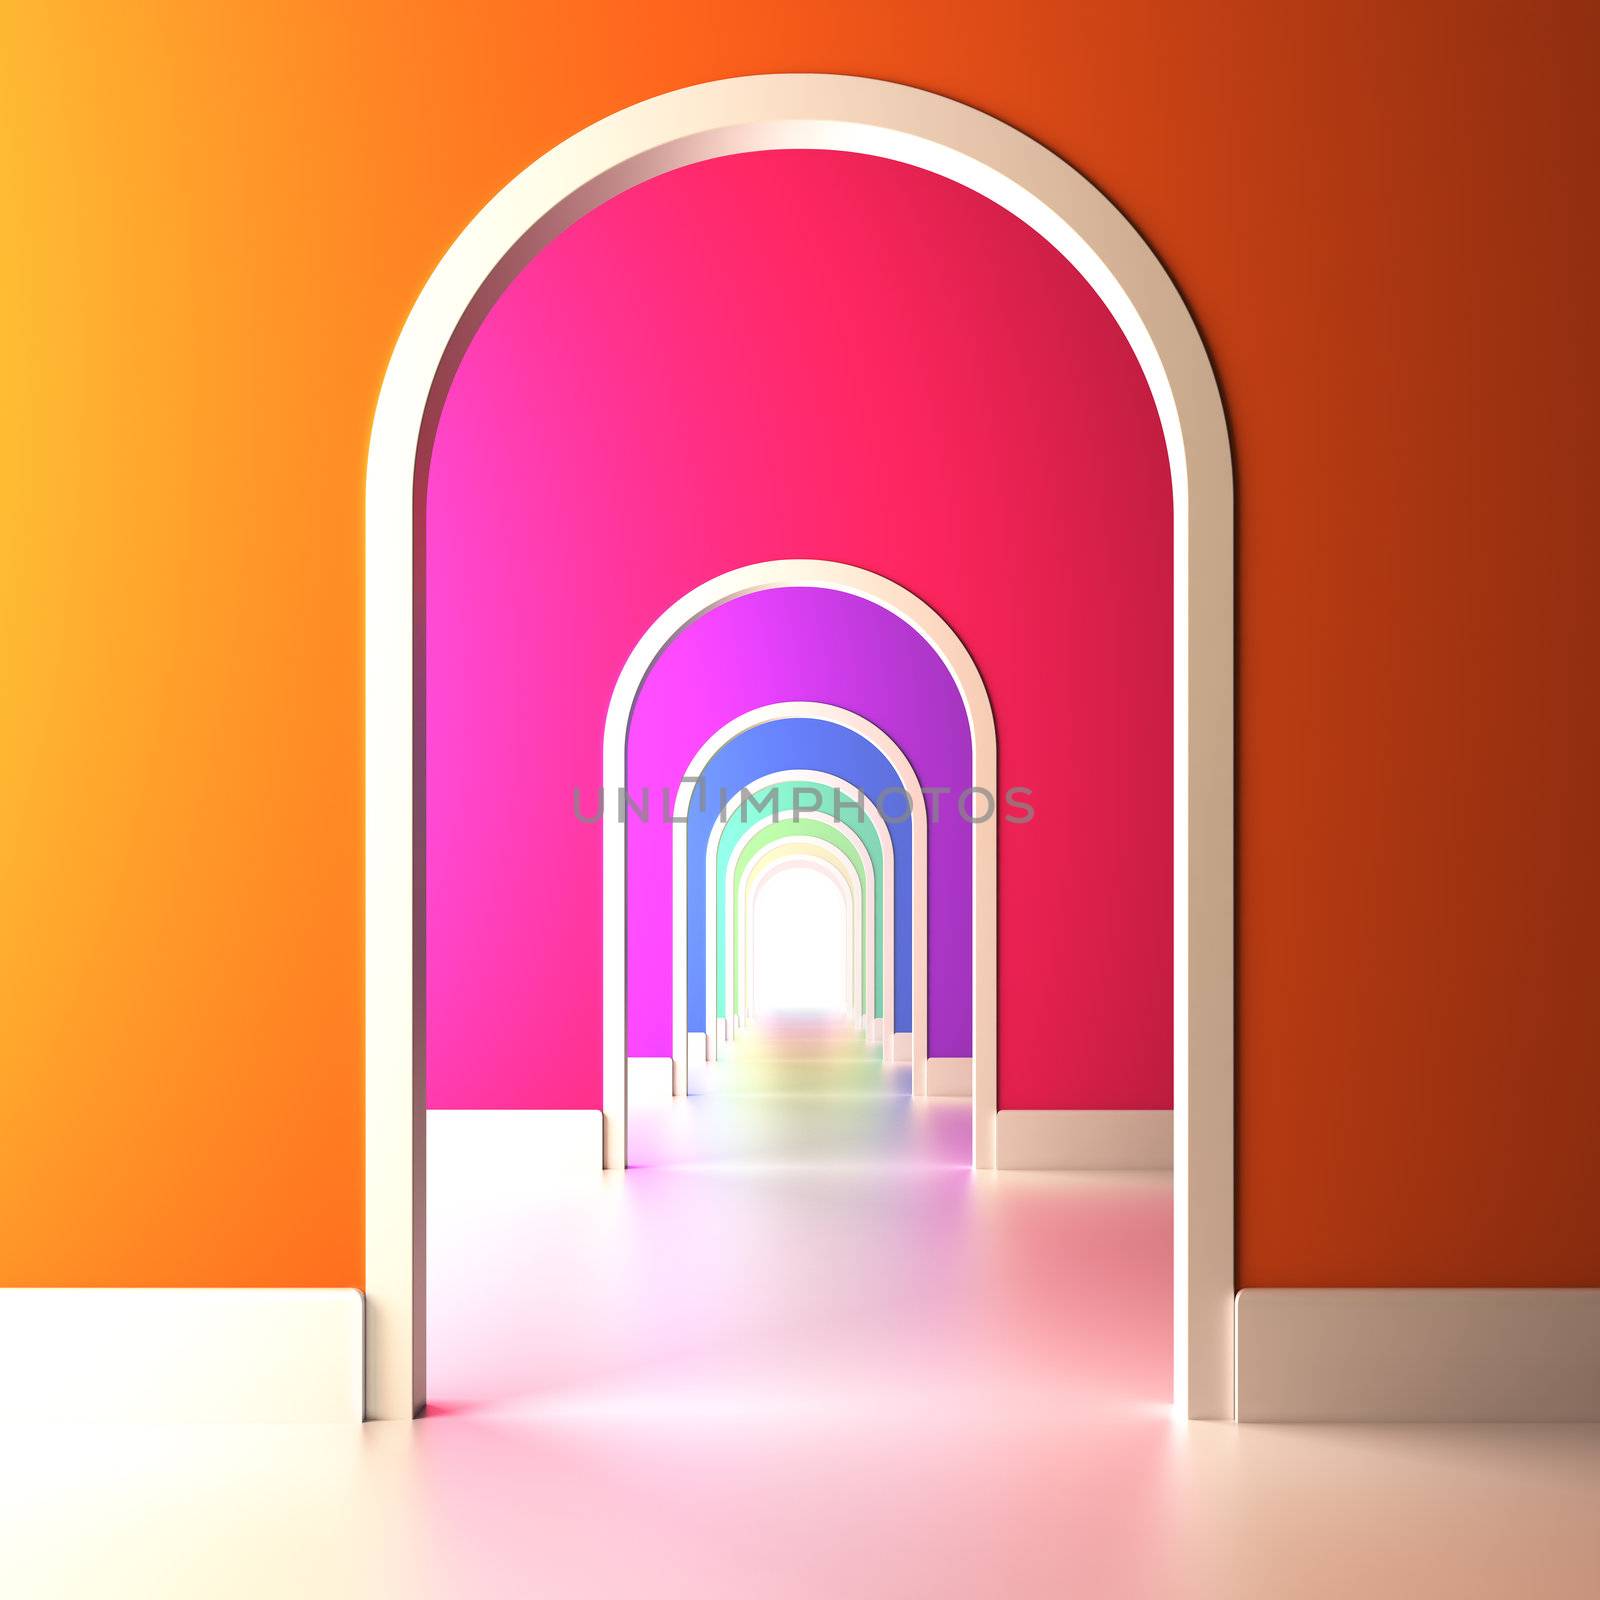 Archway to the colorful future. by _nav_